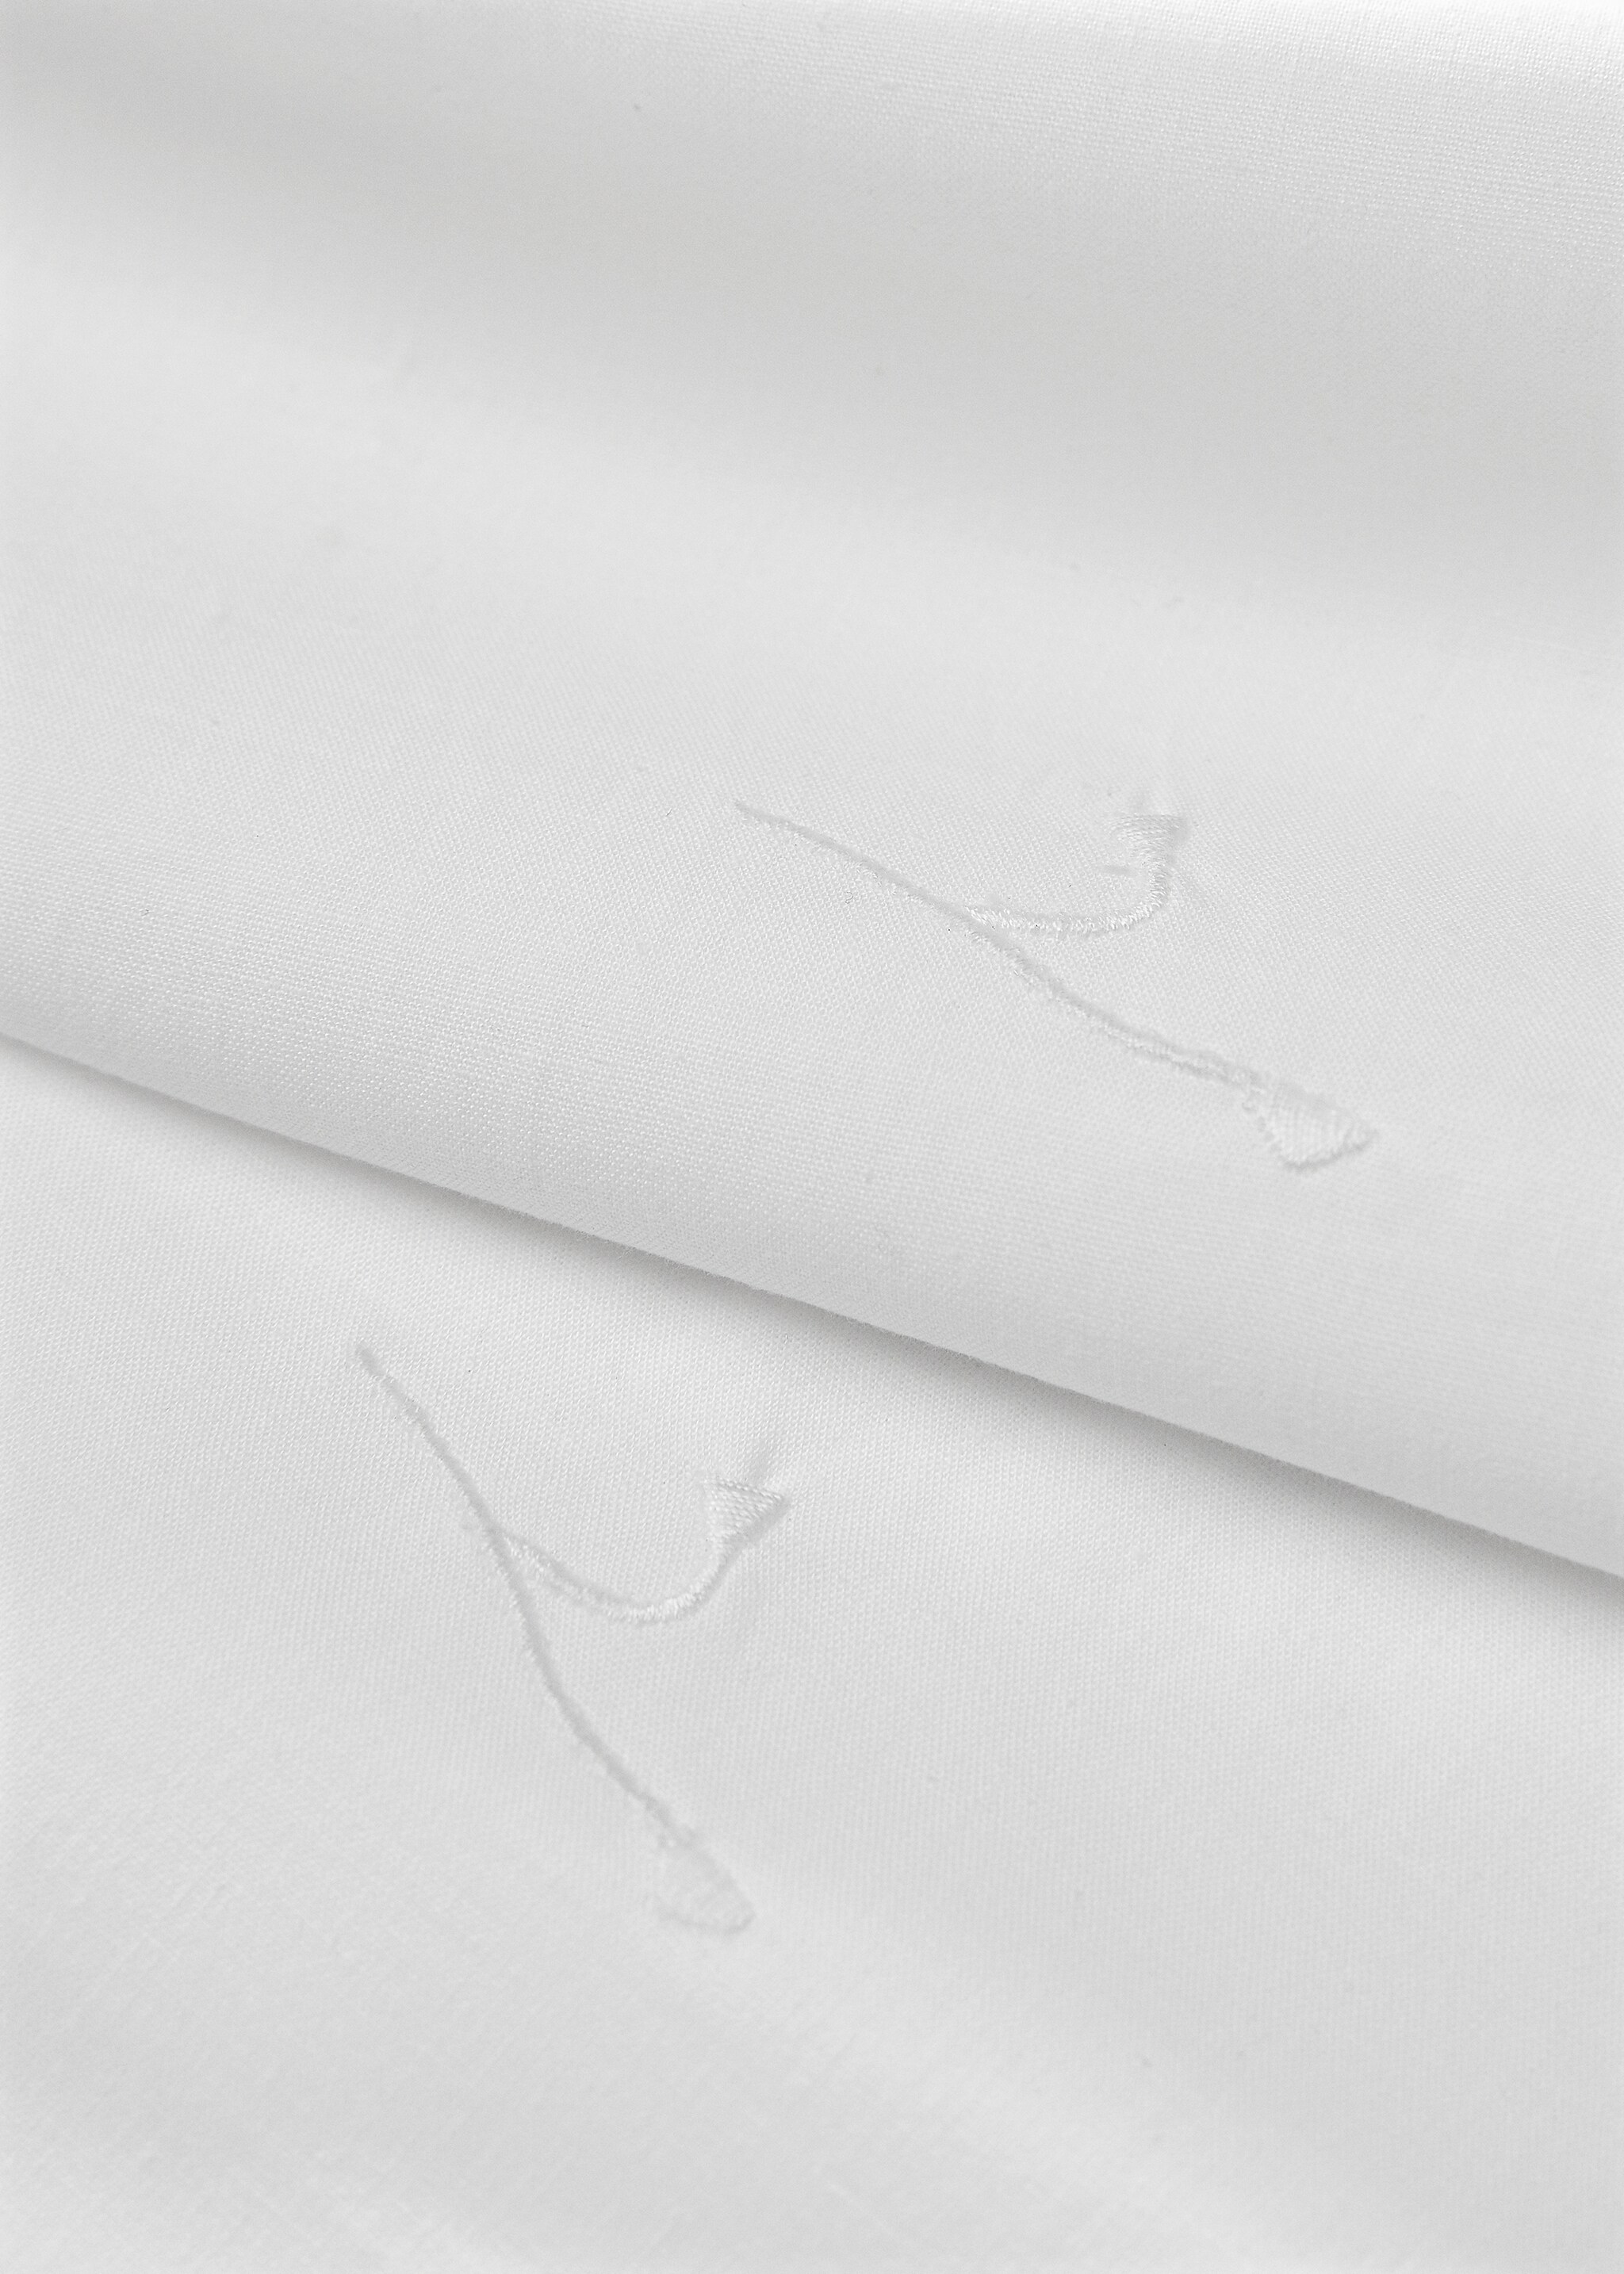 Floral embroidered cotton pillowcase 60x60cm - Details of the article 3